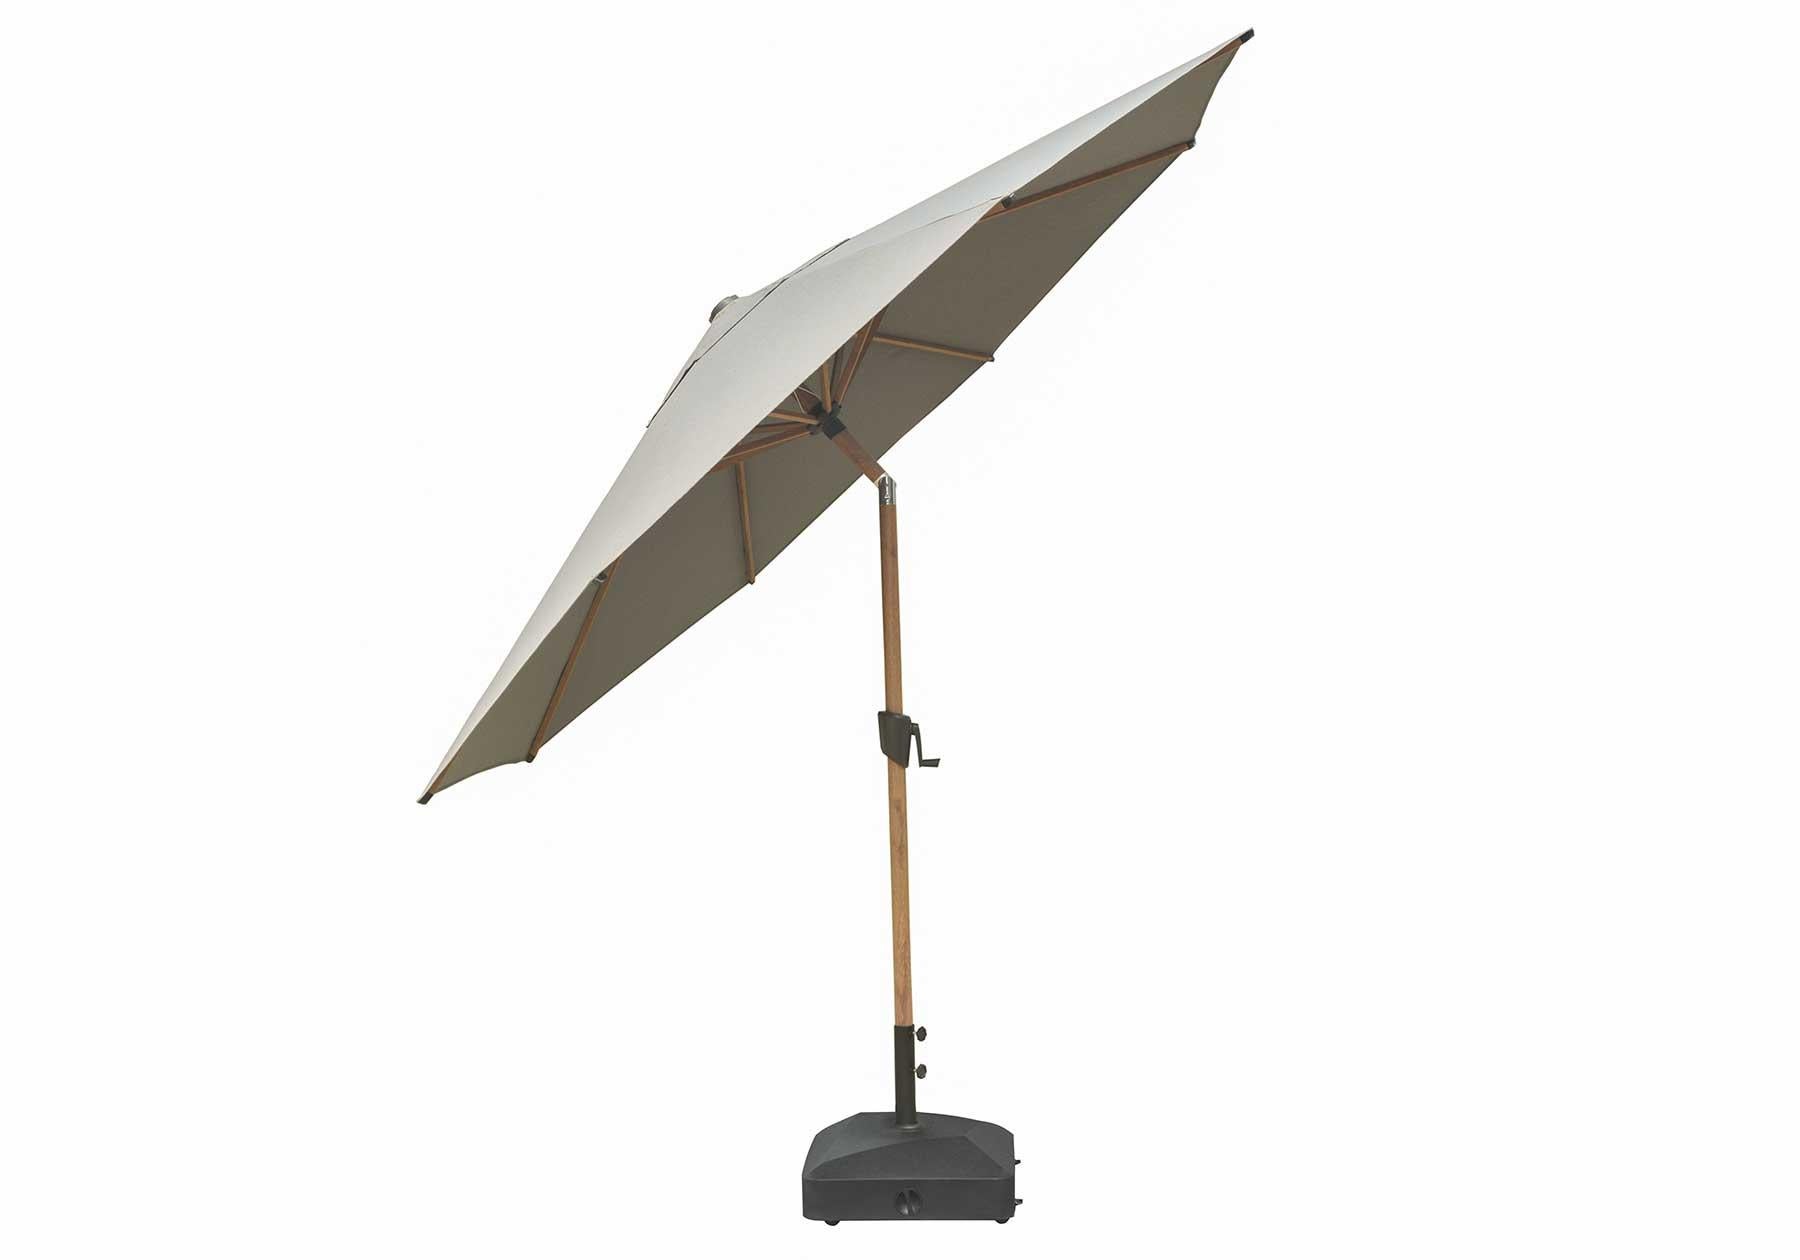 Agate Beige Umbrella by Snoc In New Condition For Sale In Yukarıdudullu, 34